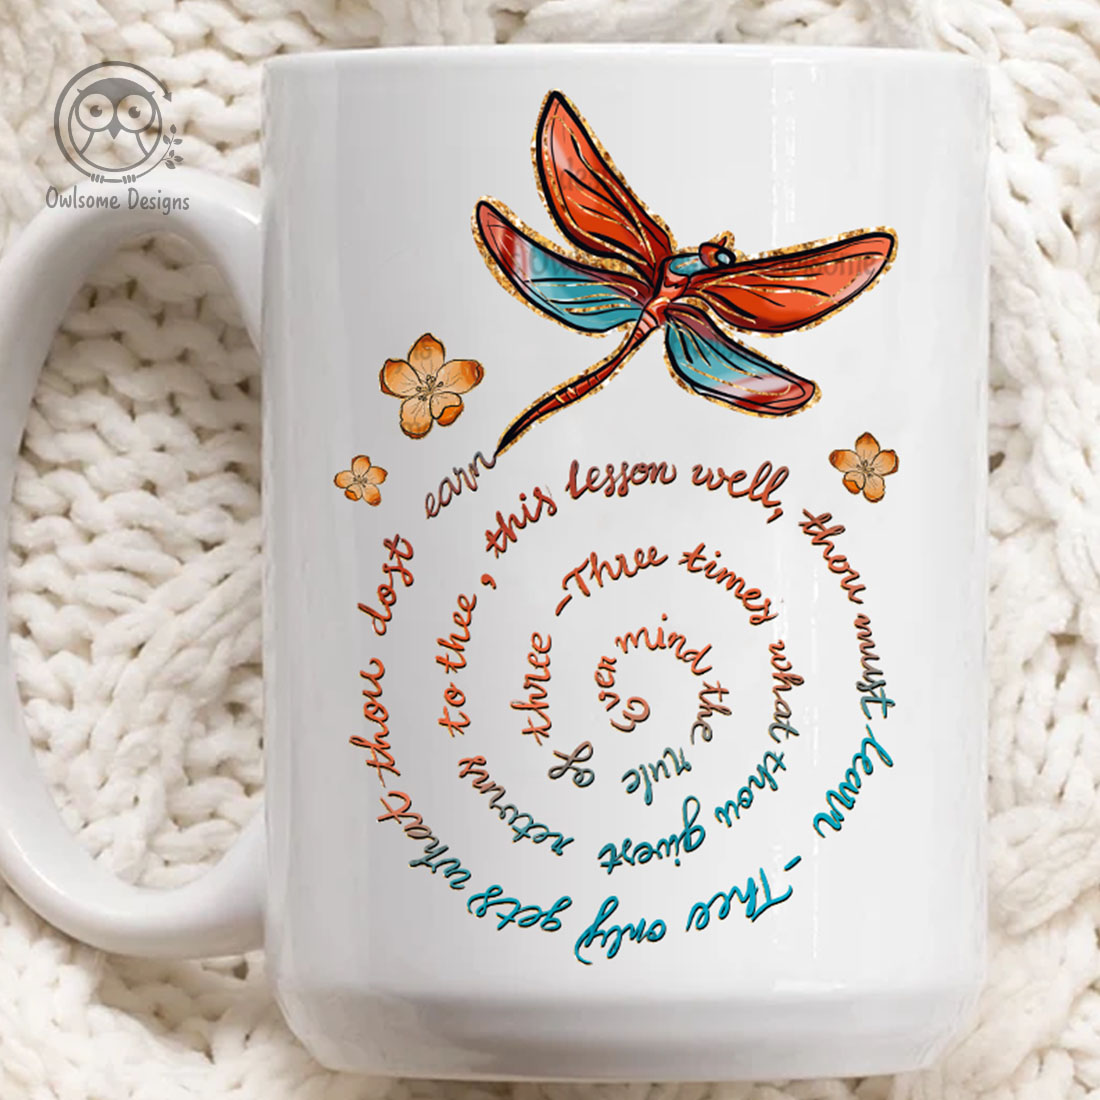 Image of a cup with a fabulous dragonfly print.